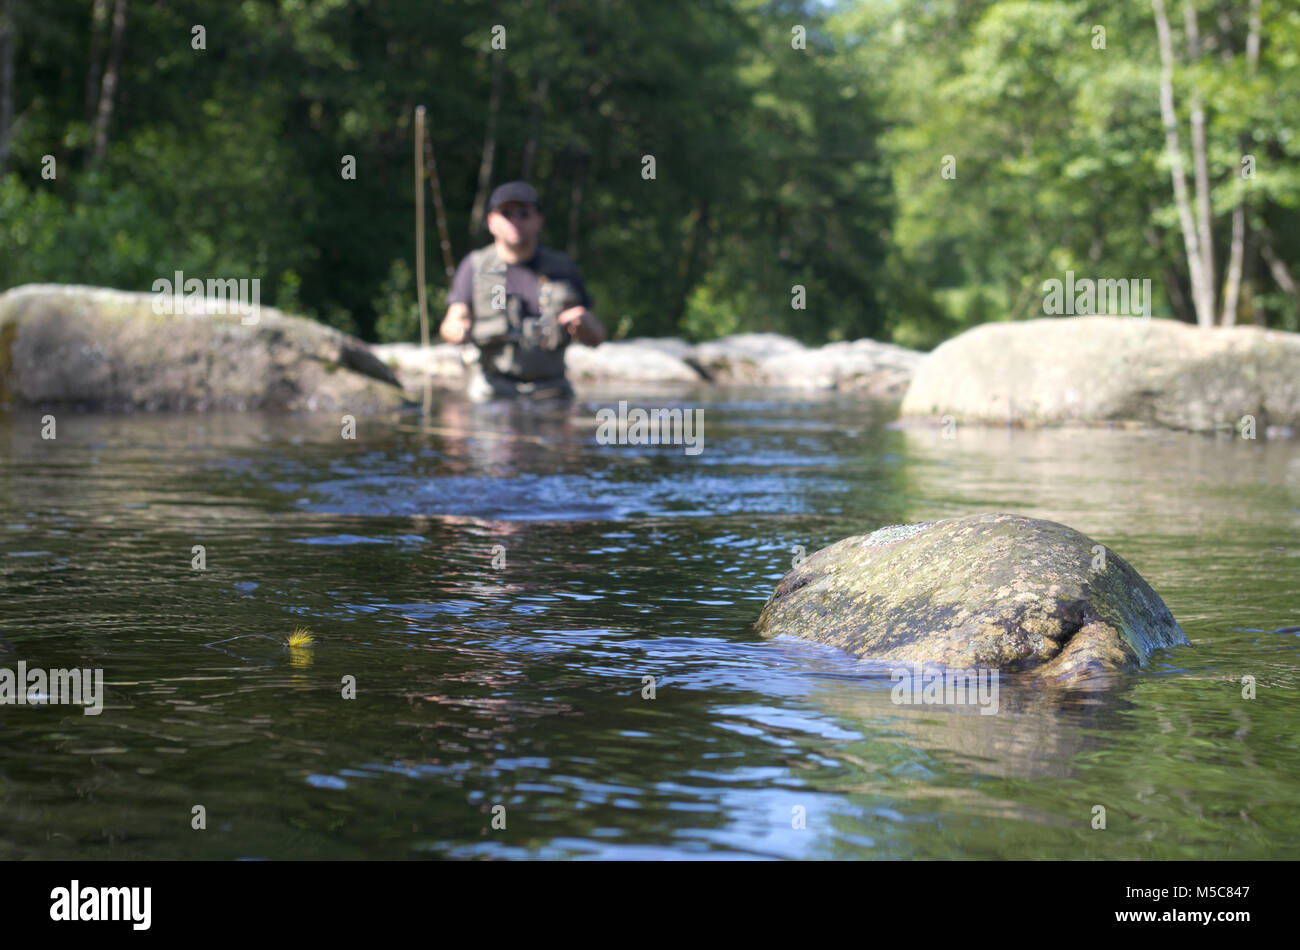 Fly fishermen in a French trout river. Fly fishing scene focused on fly fishing lure. Stock Photo